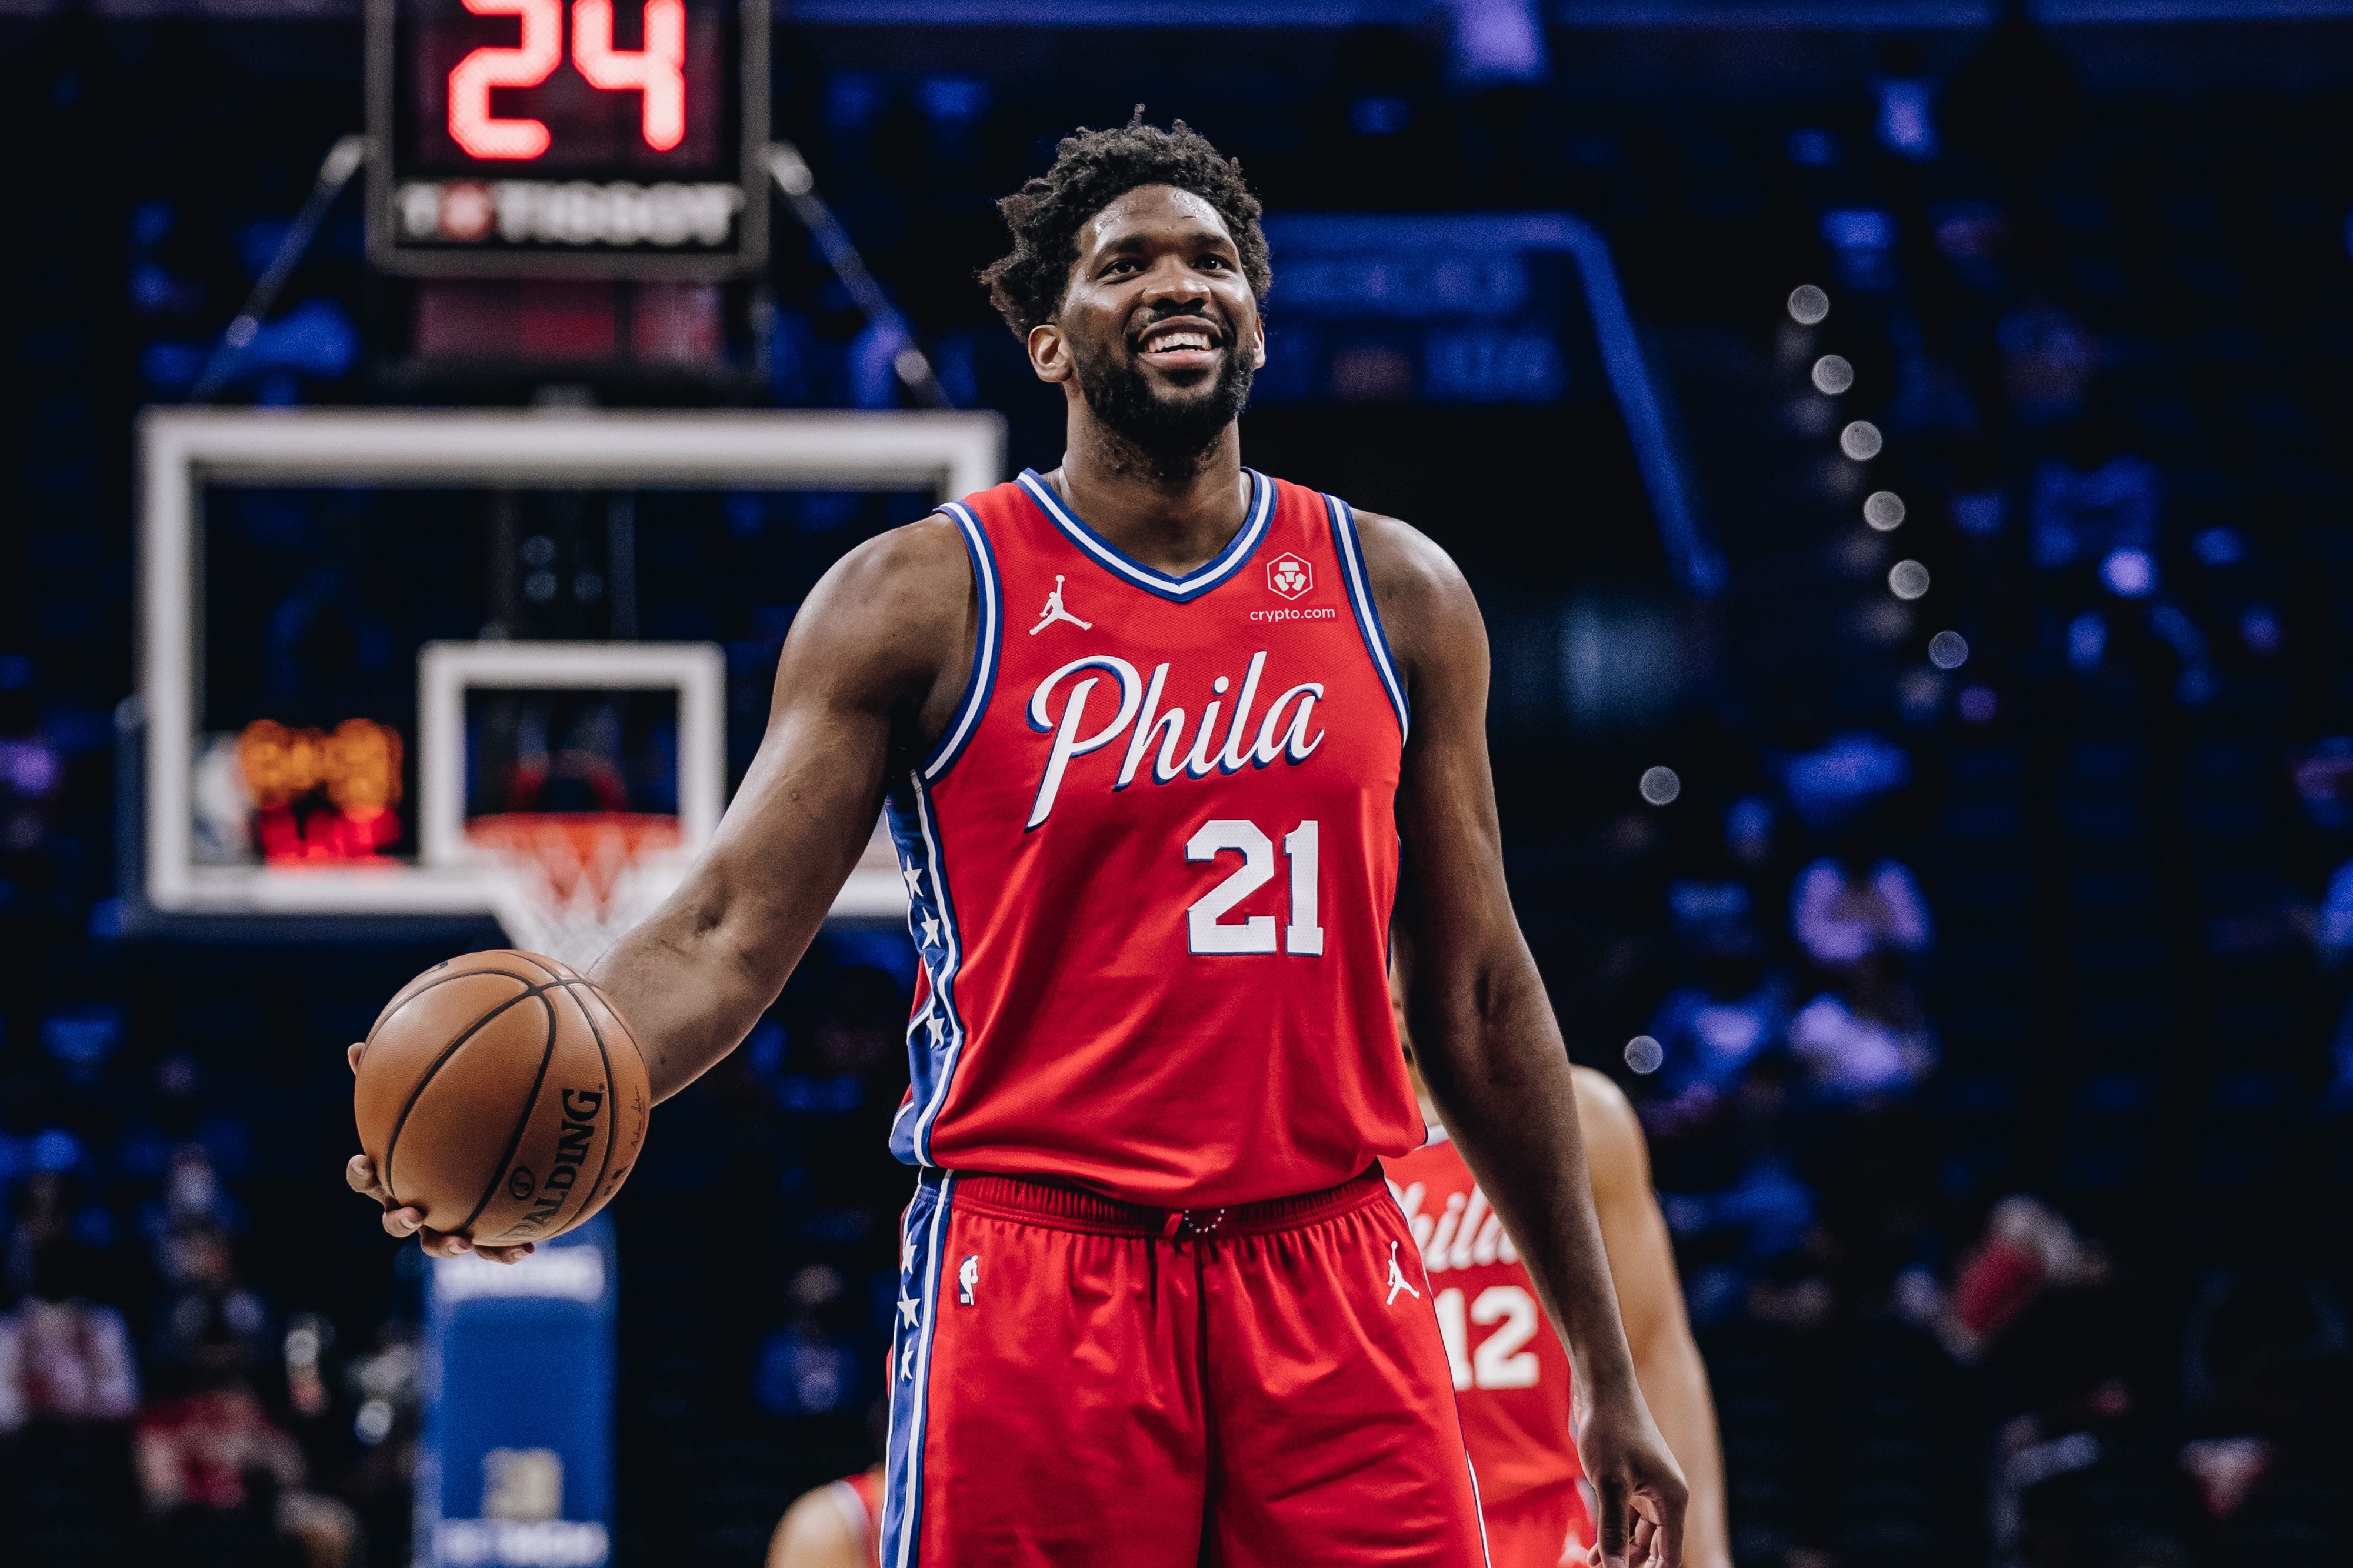 Sixers make Crypto their new jersey sponsor, to sell NFT jersey series